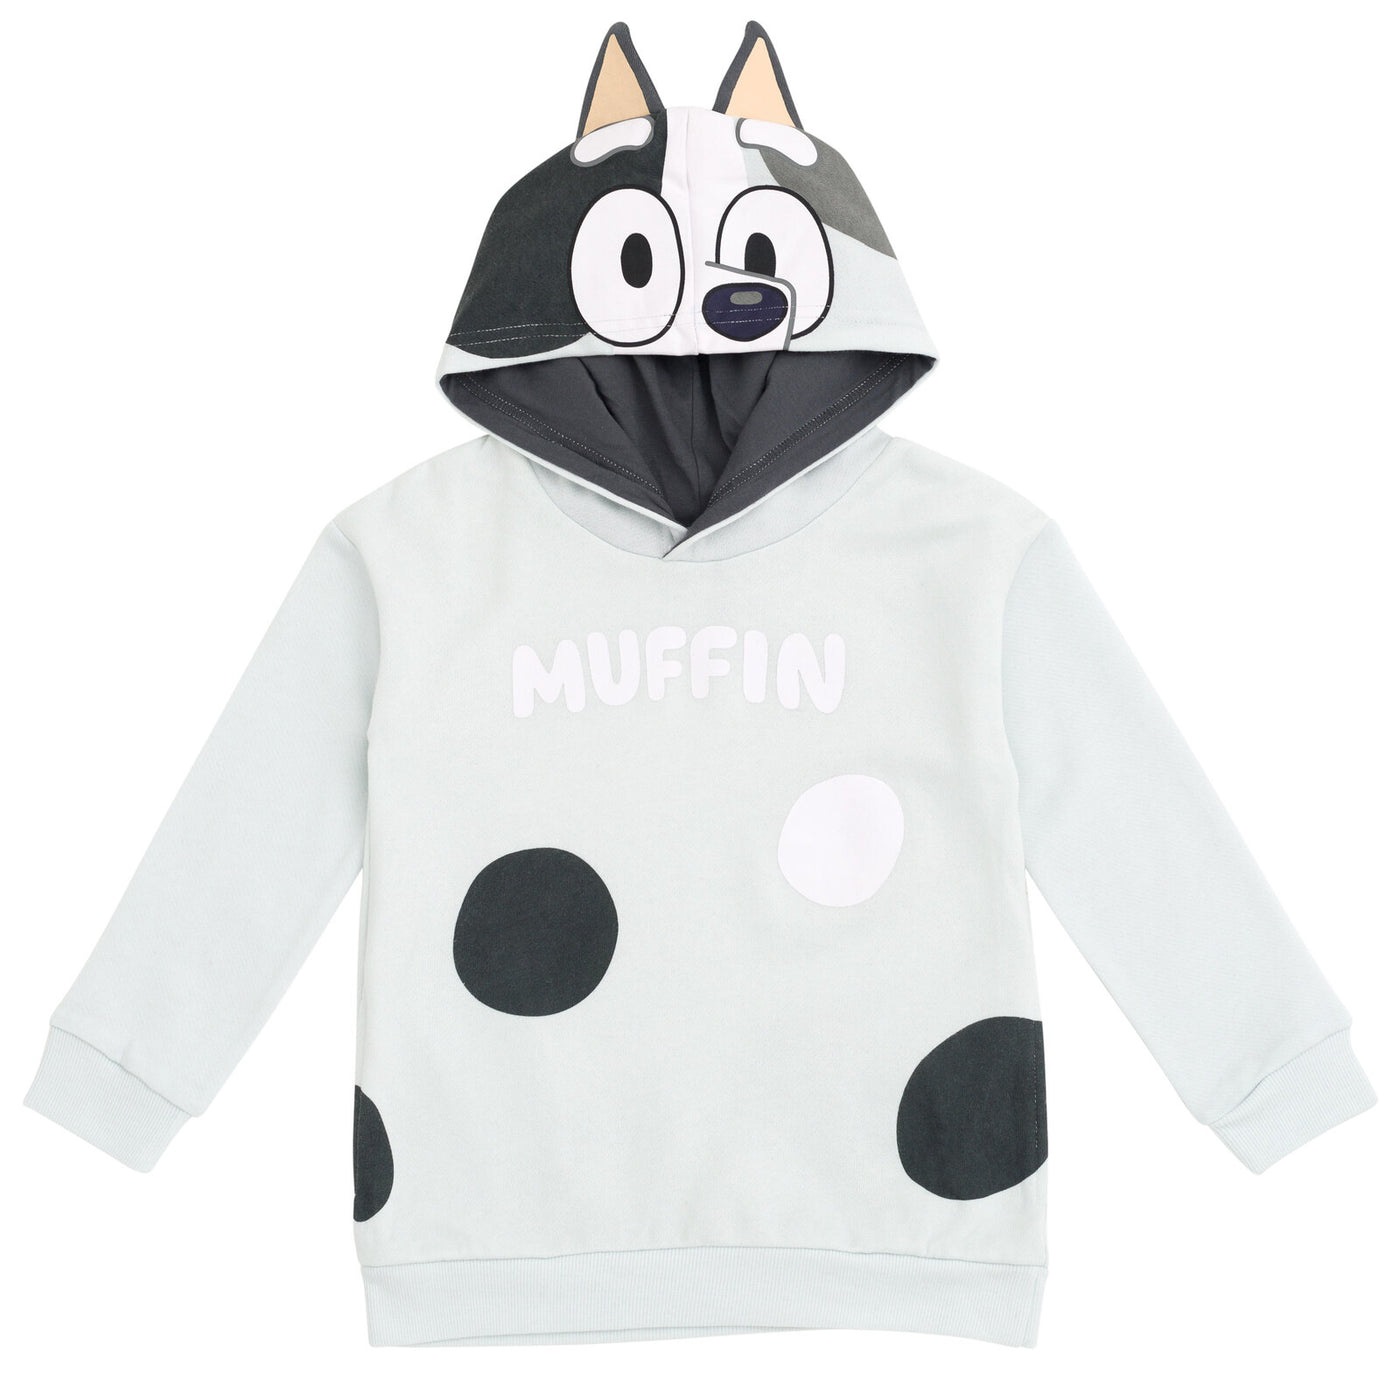 Bluey Fleece Matching Family Cosplay Pullover Hoodie